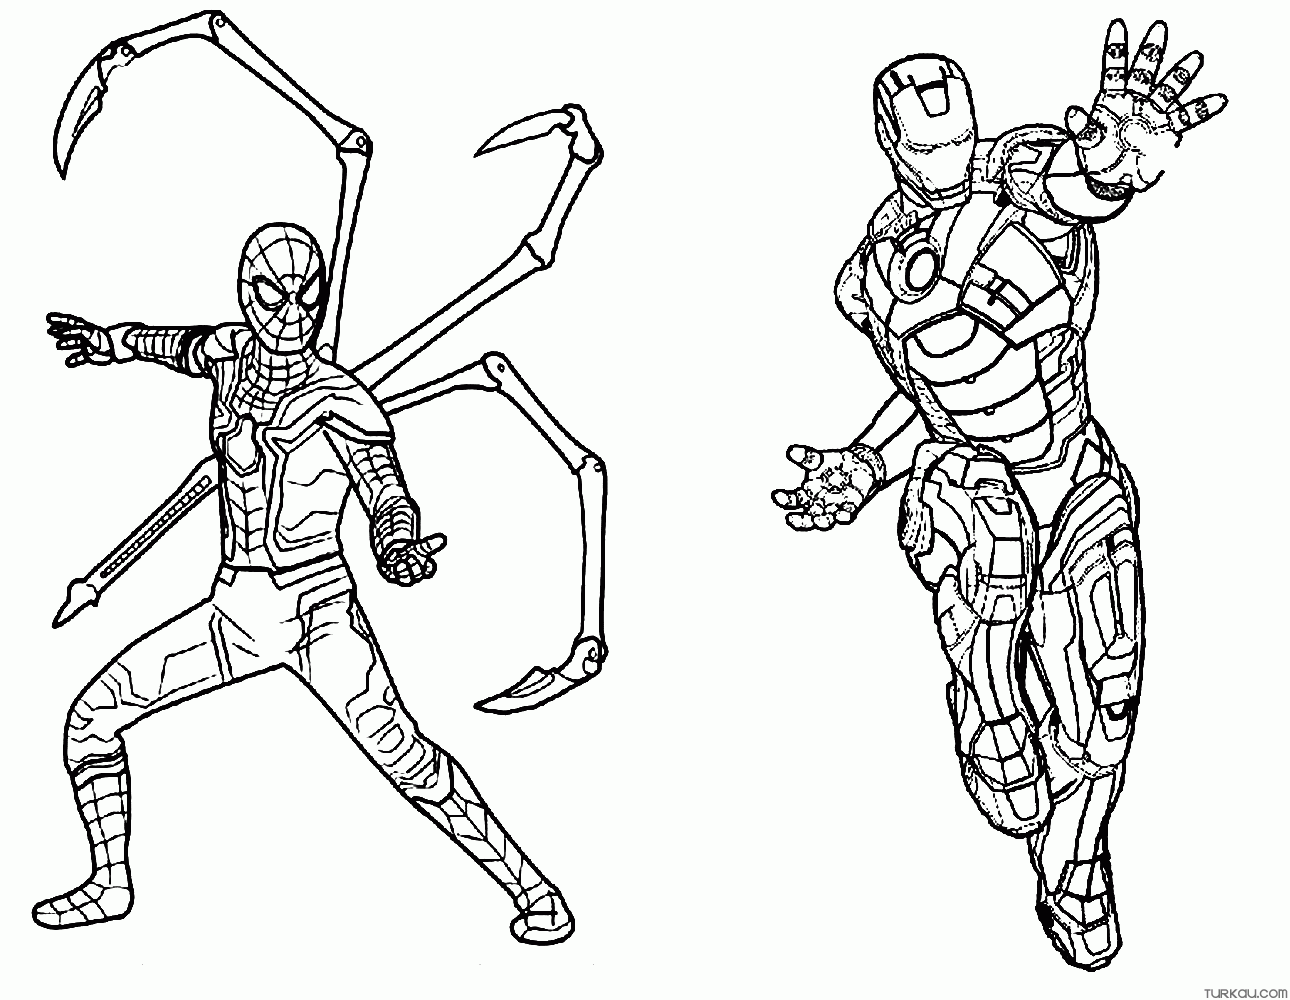 Iron spiderman coloring page